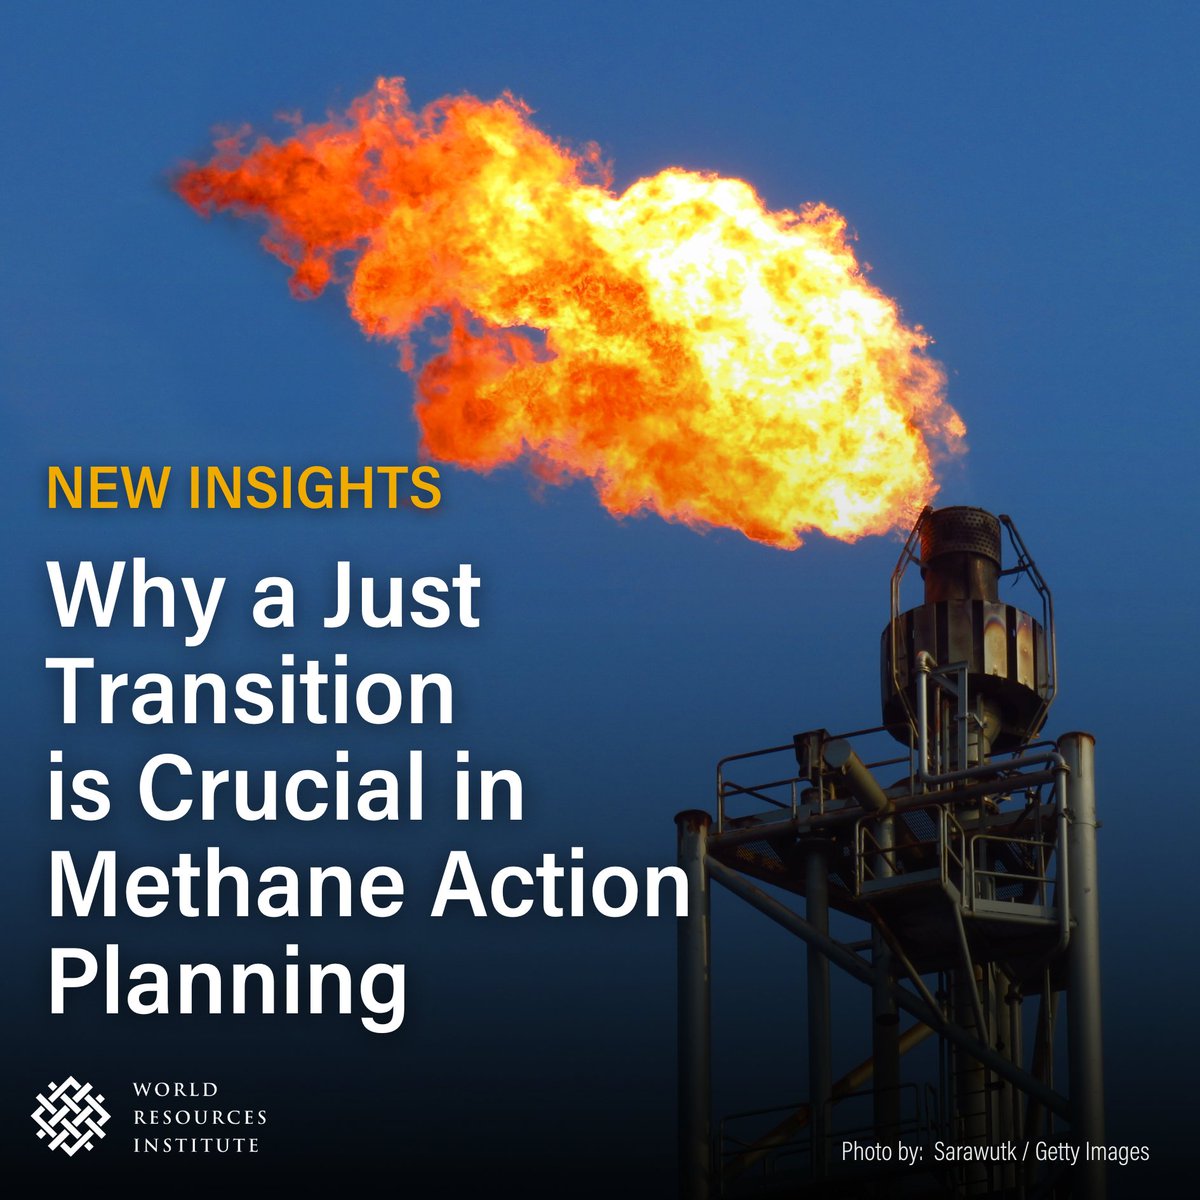 To keep temperature rise below 1.5°C, #fossilfuel operations must reduce their methane emissions by 75% by 2030📉 New research from WRI Climate looks at why a #justtransition is crucial to methane action planning: bit.ly/443sNJH